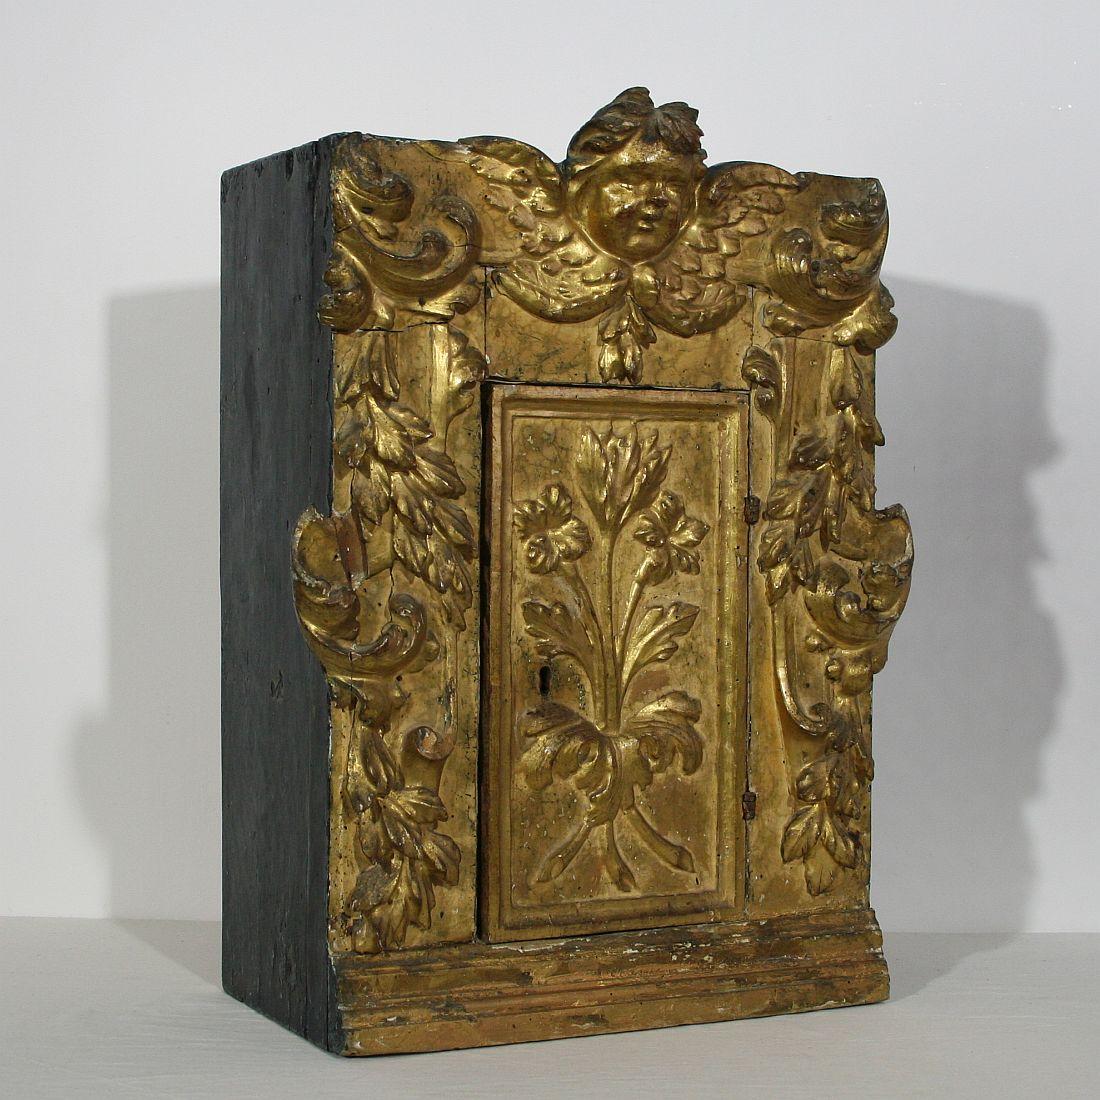 Hand-Carved 18th Century Italian Carved Giltwood Baroque Tabernacle with Angel